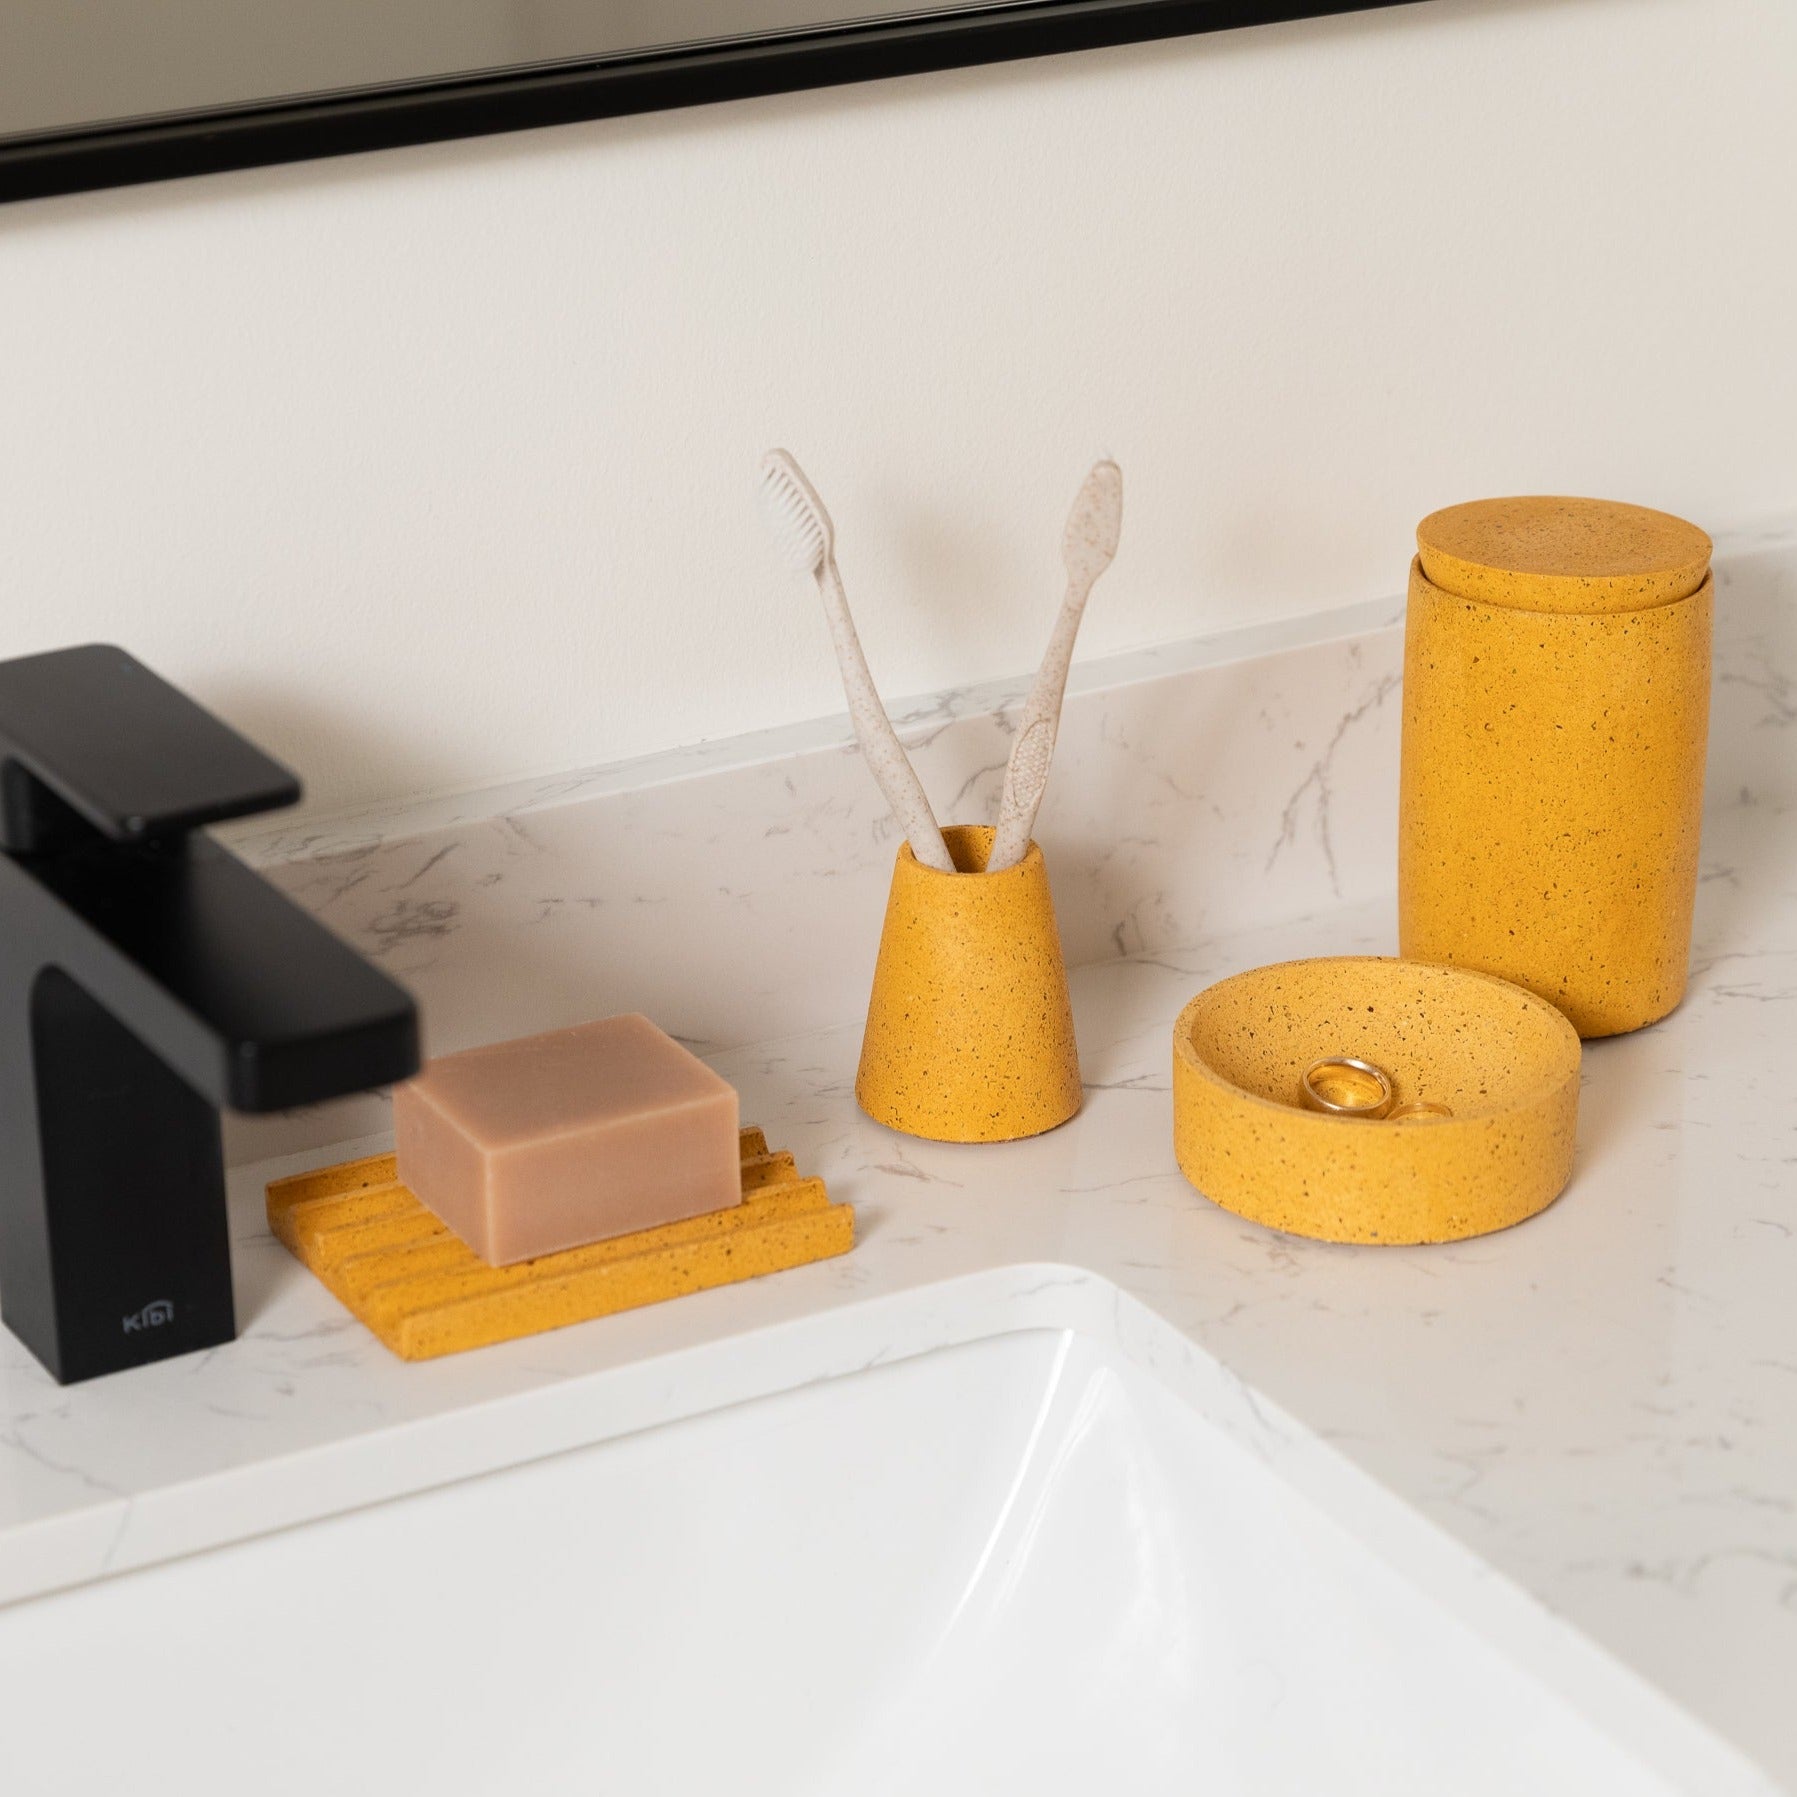 Toothbrush Holder in Marigold Terrazzo, styled by a sink.